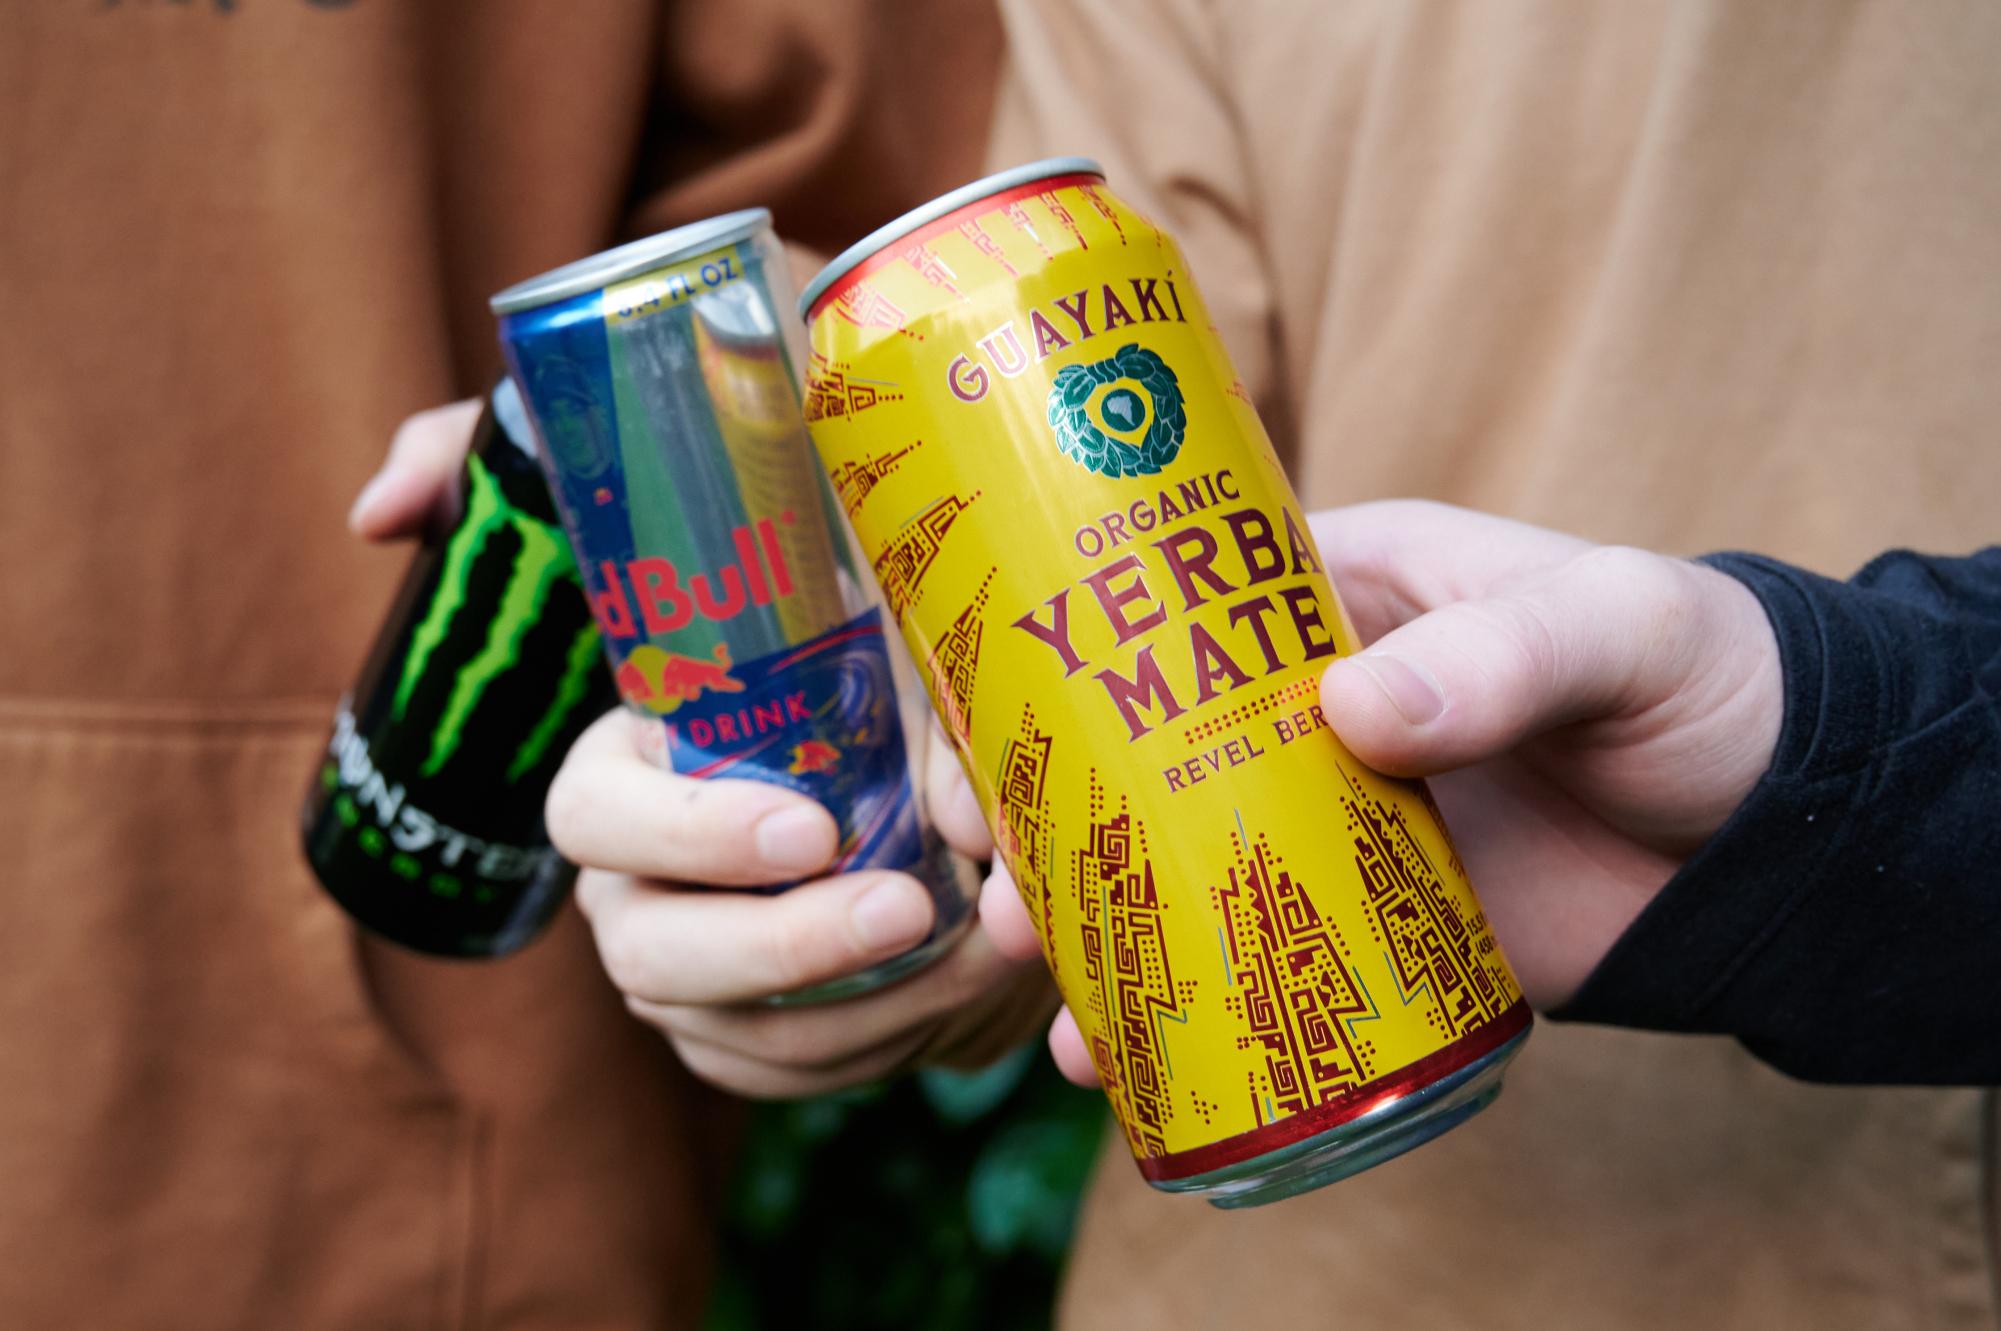 Monster Energy, Red Bull Energy Drink, and Guayaki
Yerba Mate cans being held in Corvallis Oregon on October 15.